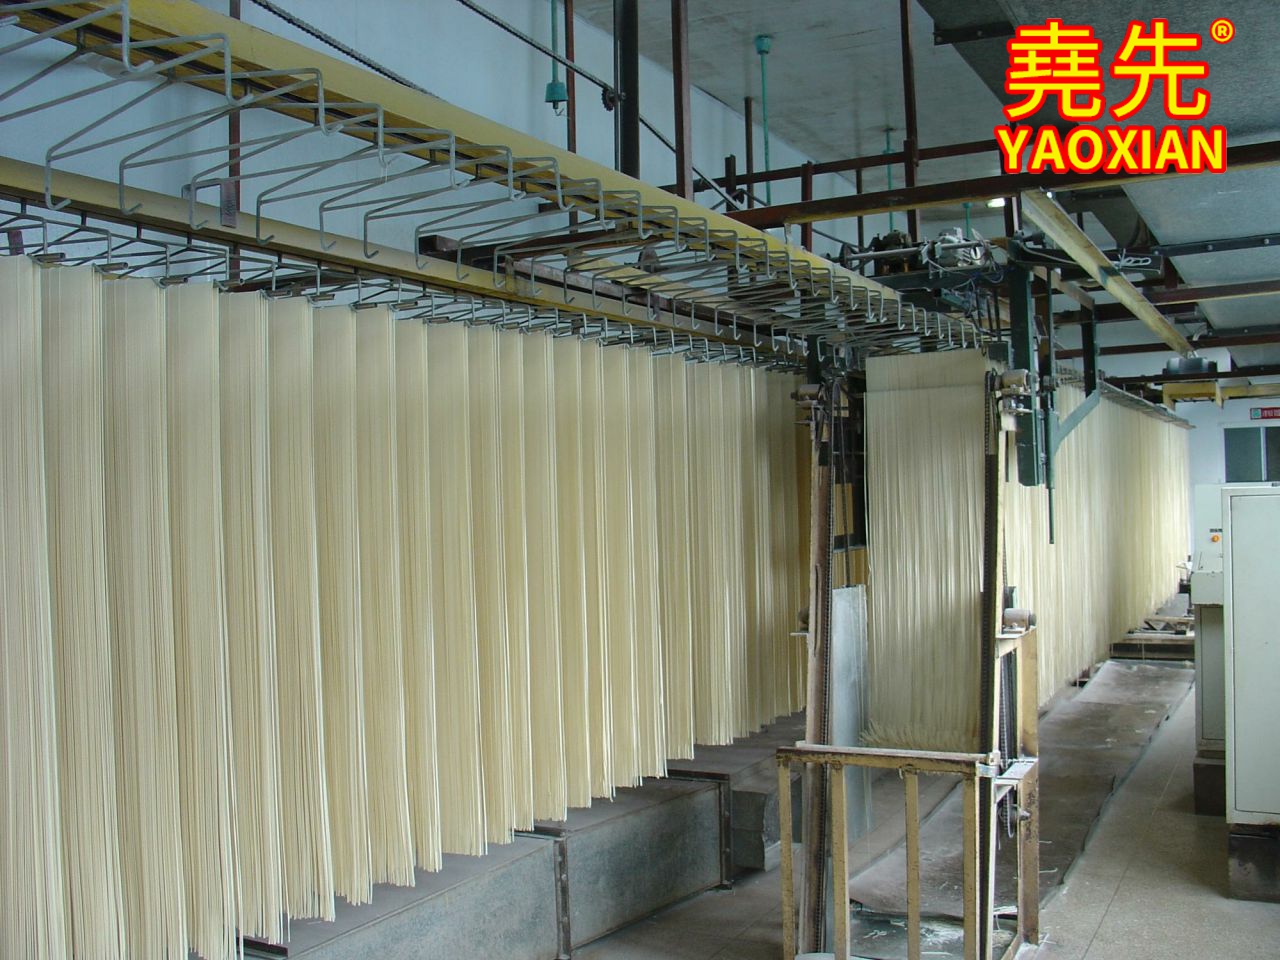 Commercial multifunctional rice noodle machine for making and processing various delicious noodles and vermicelli